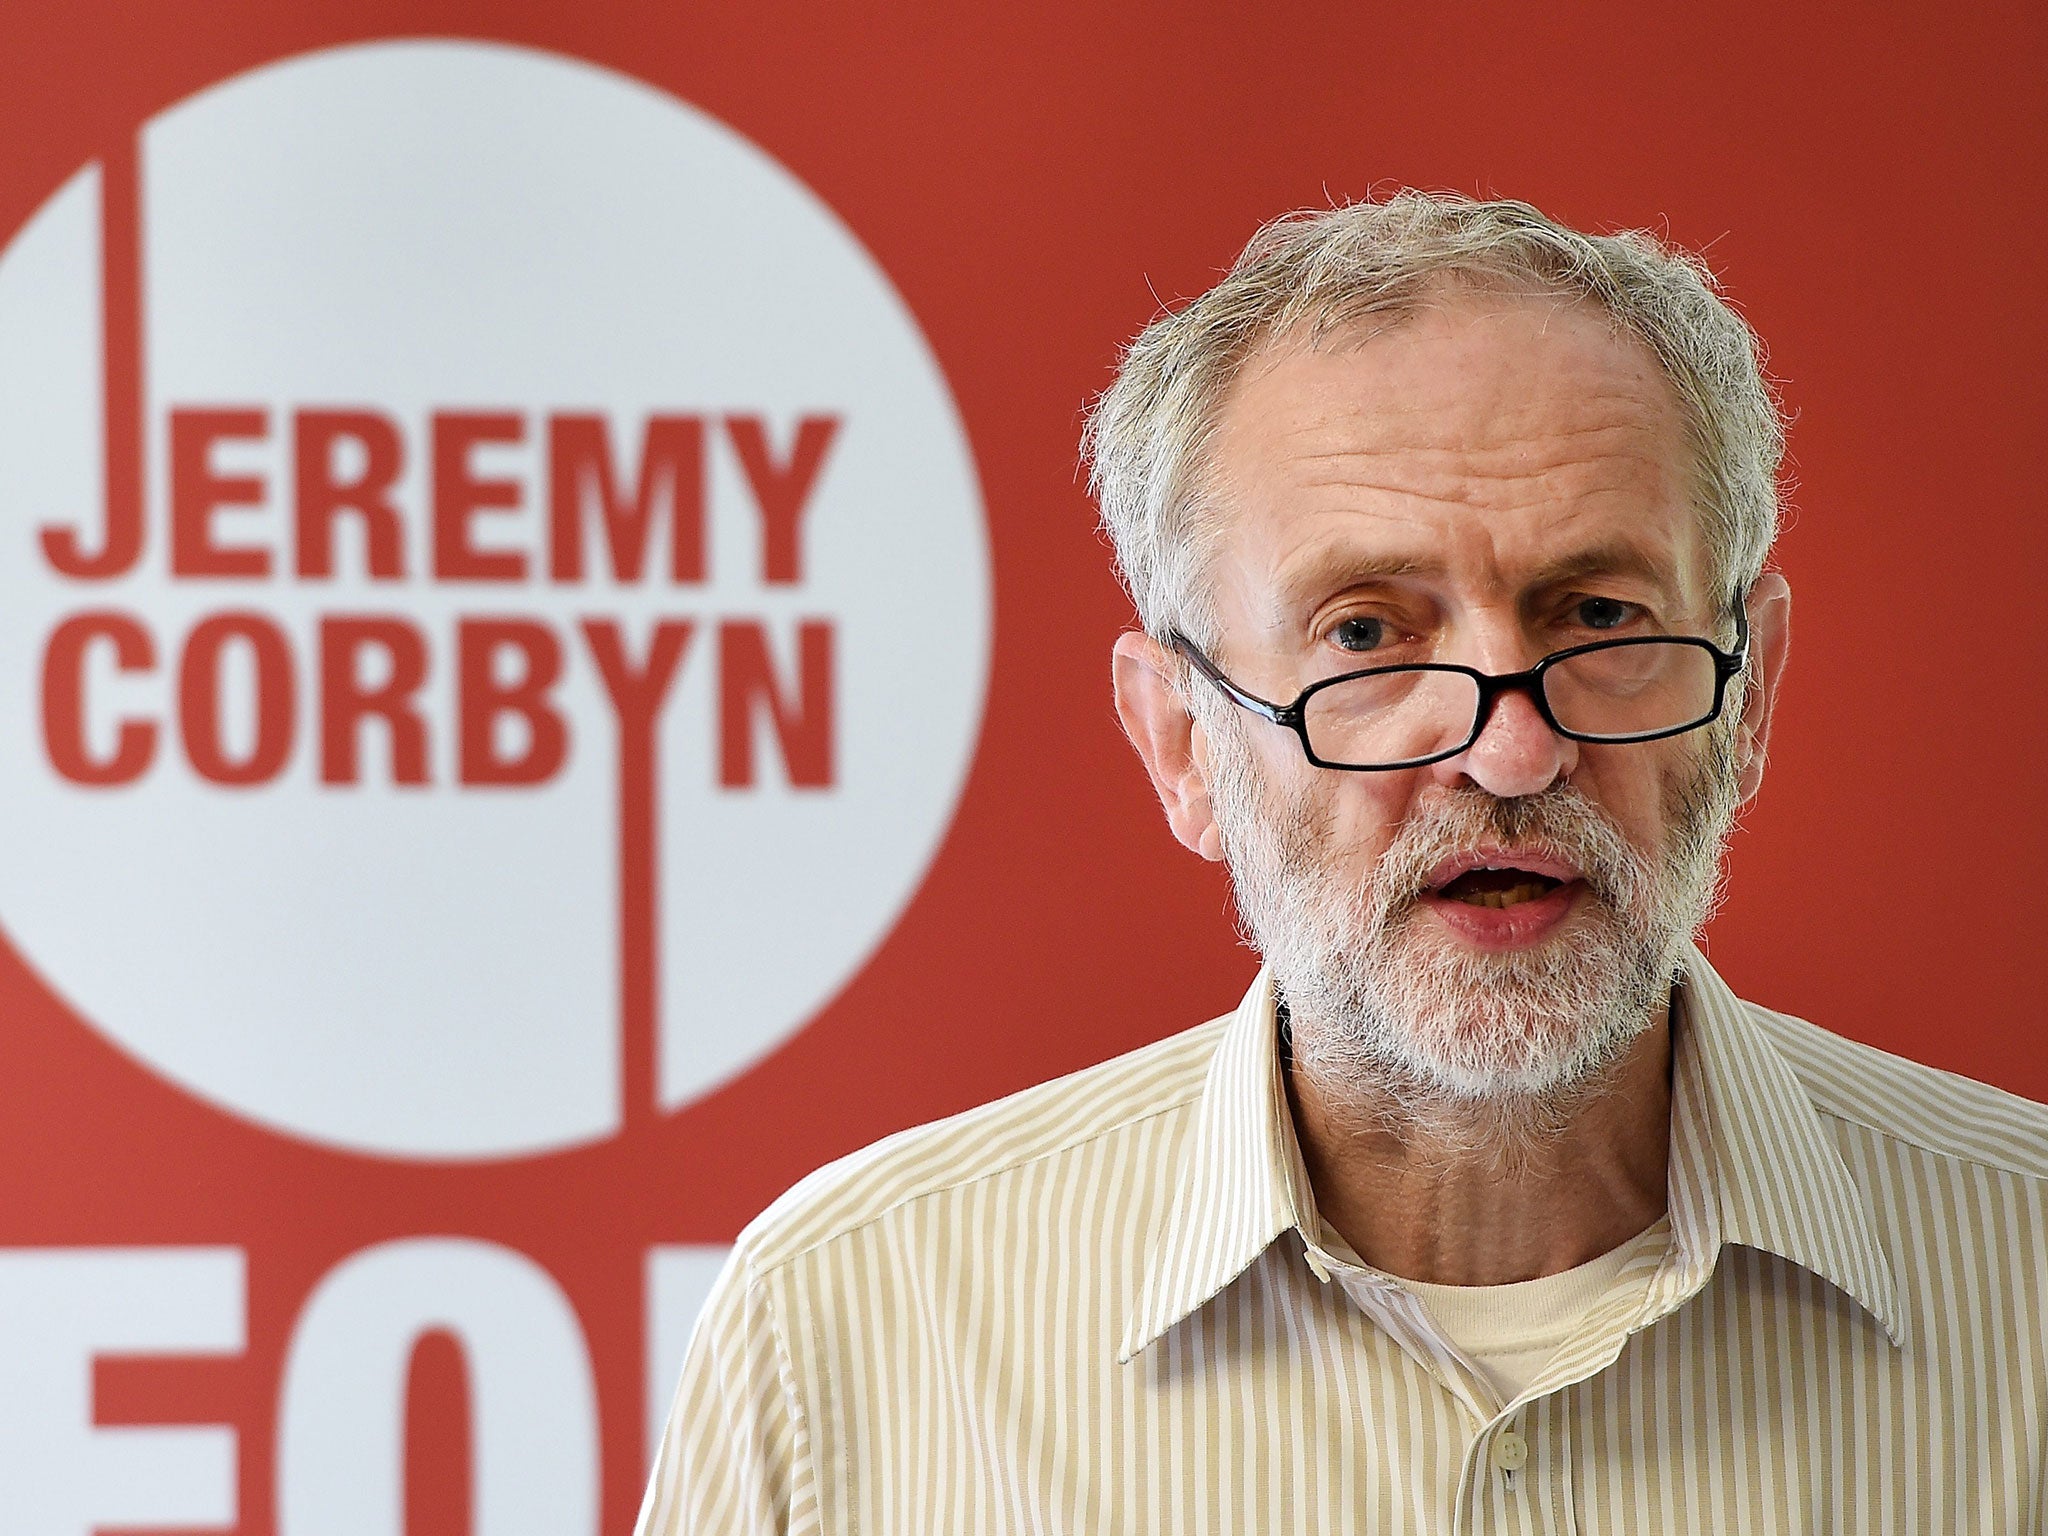 Jeremy Corbyn, the front-runner in the Labour leadership contest